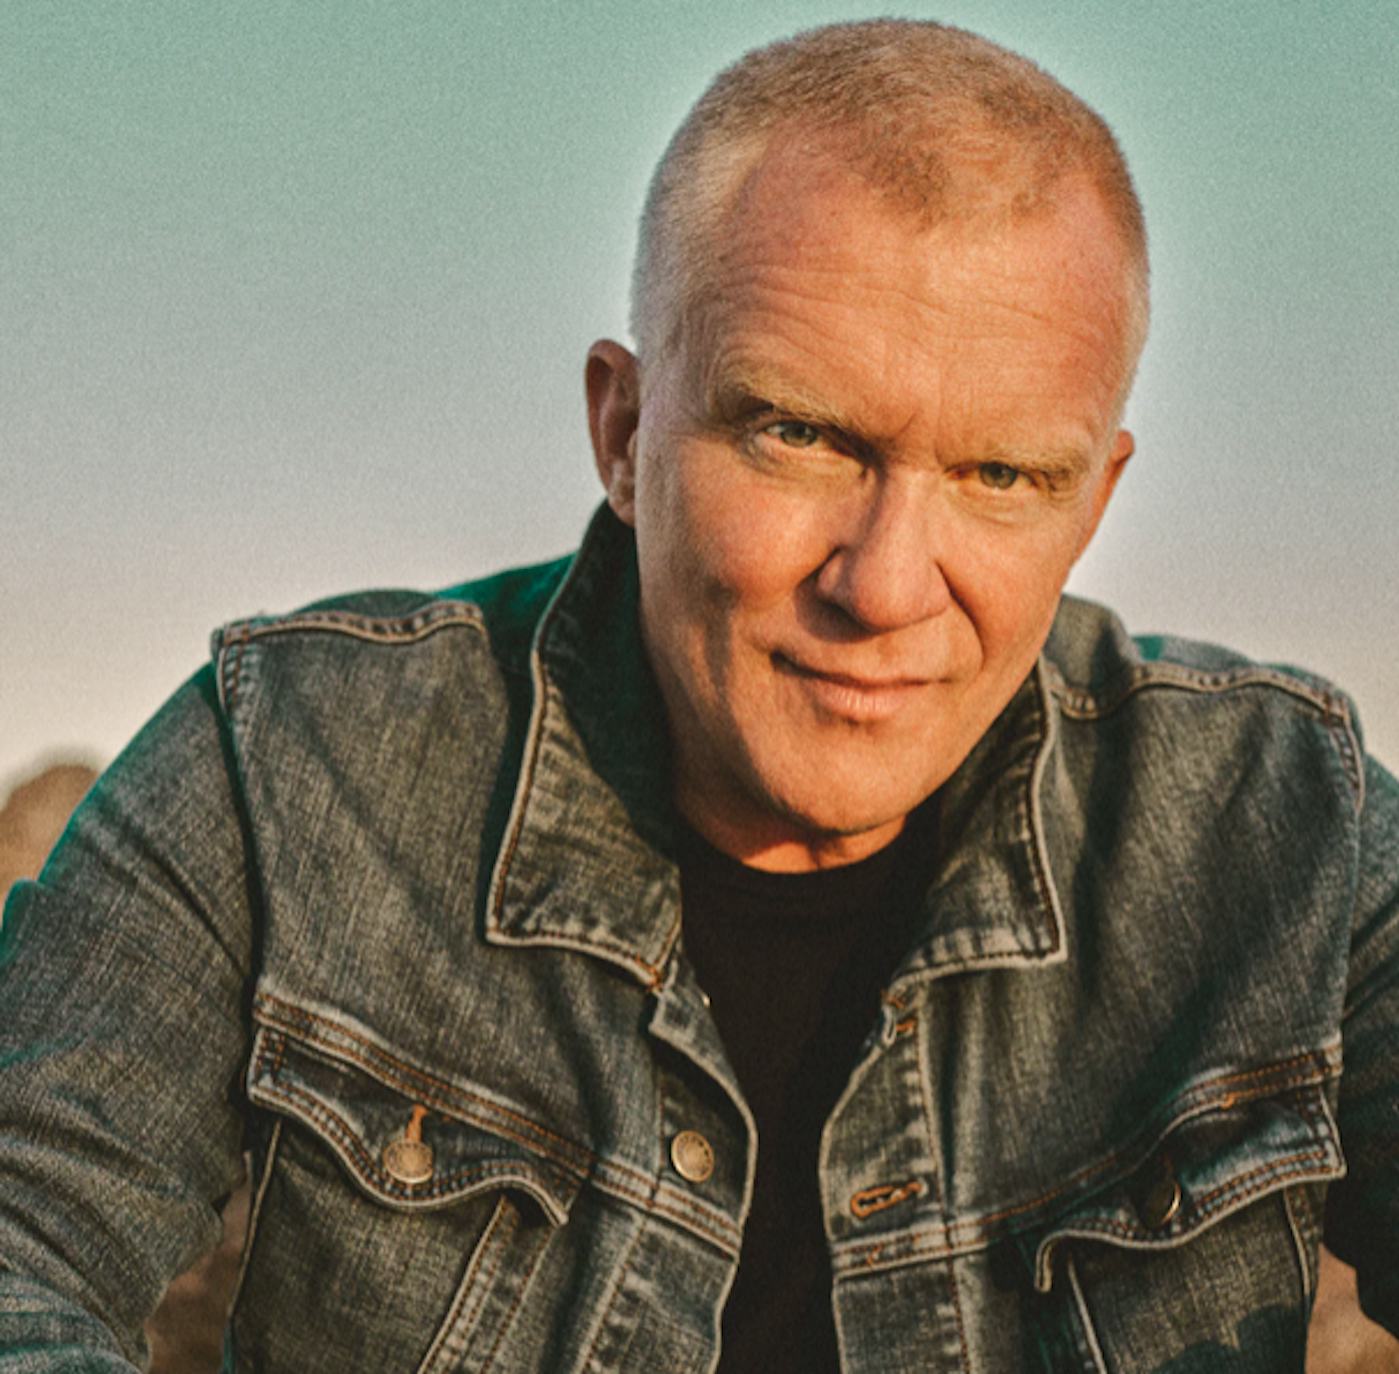 Mature man with closely cropped hair, wearing a denim jacket, smiling at the camera in a natural outdoor setting at sunset.